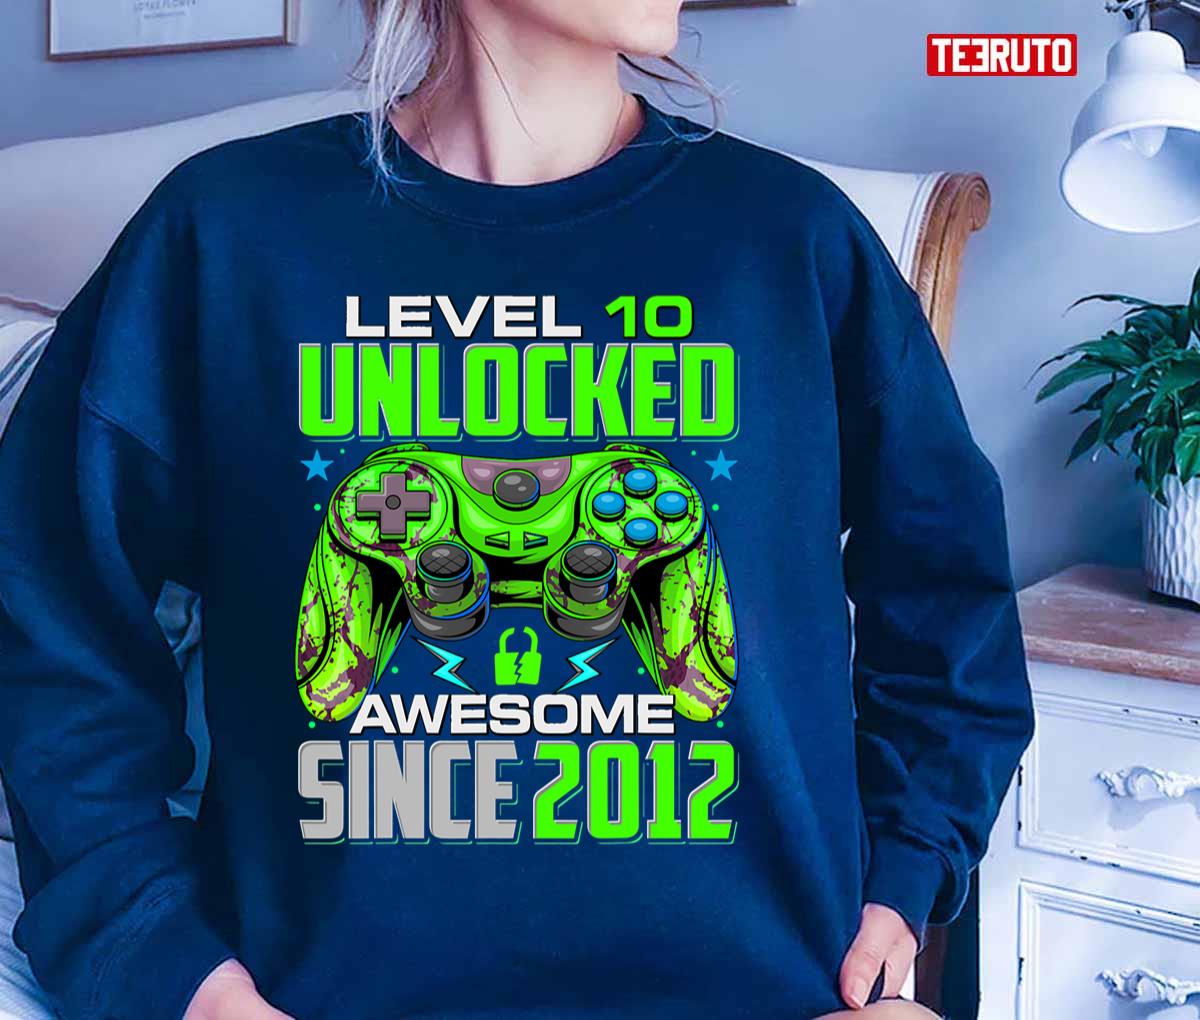 Level 10 Unlocked Awesome Since 2012 10th Birthday Gaming Unisex T-Shirt